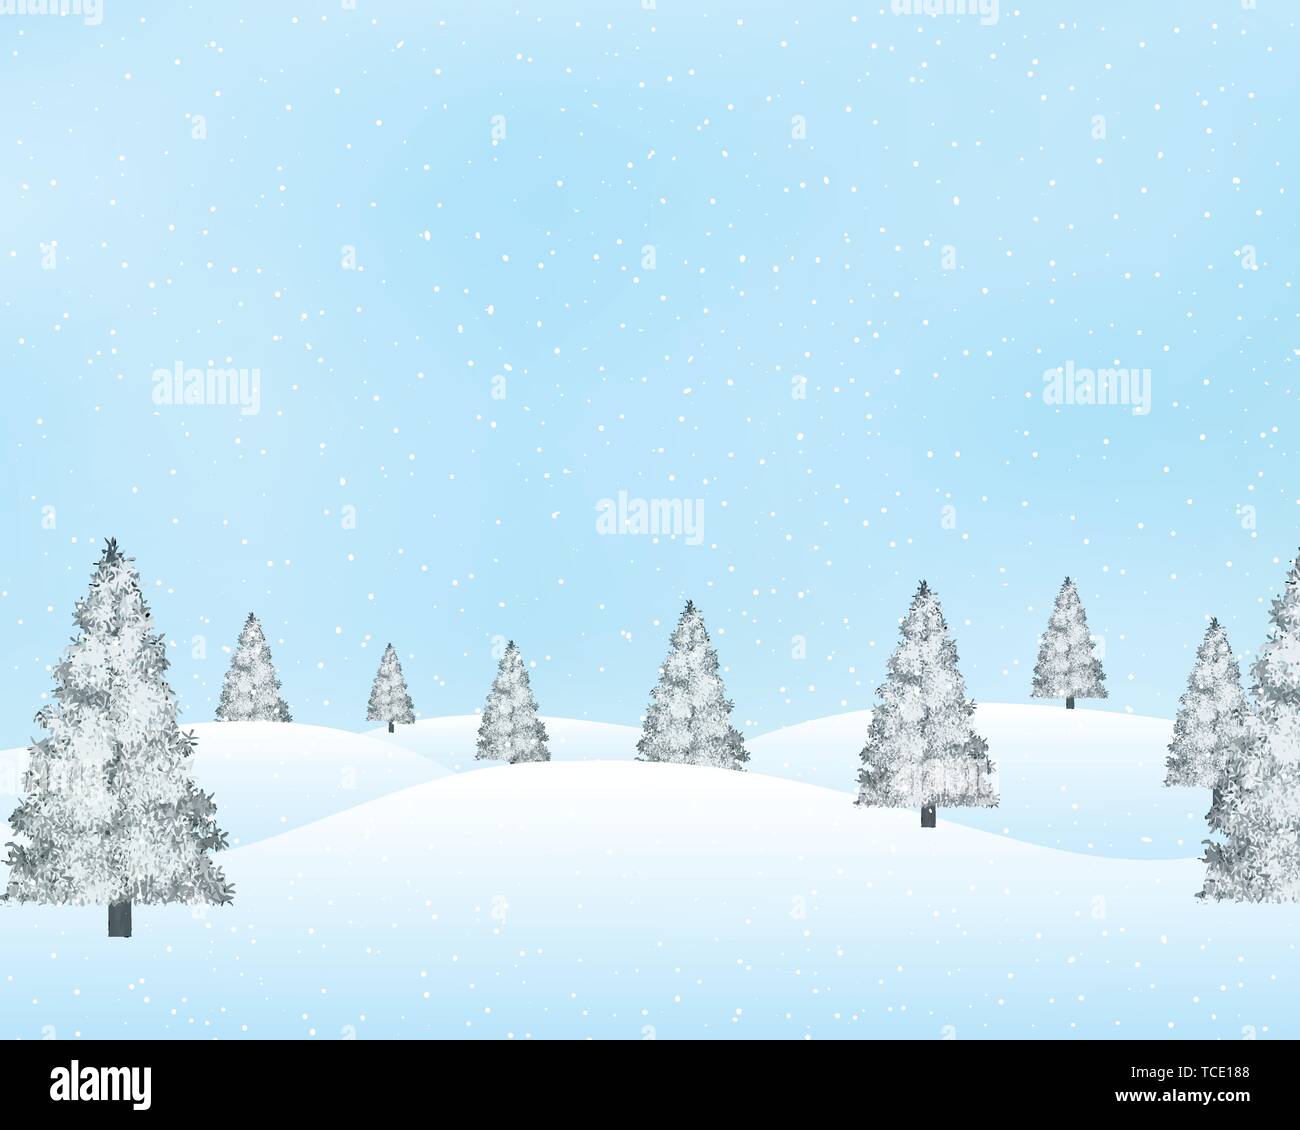 Winter landscape with snowy pine trees. Stock Vector